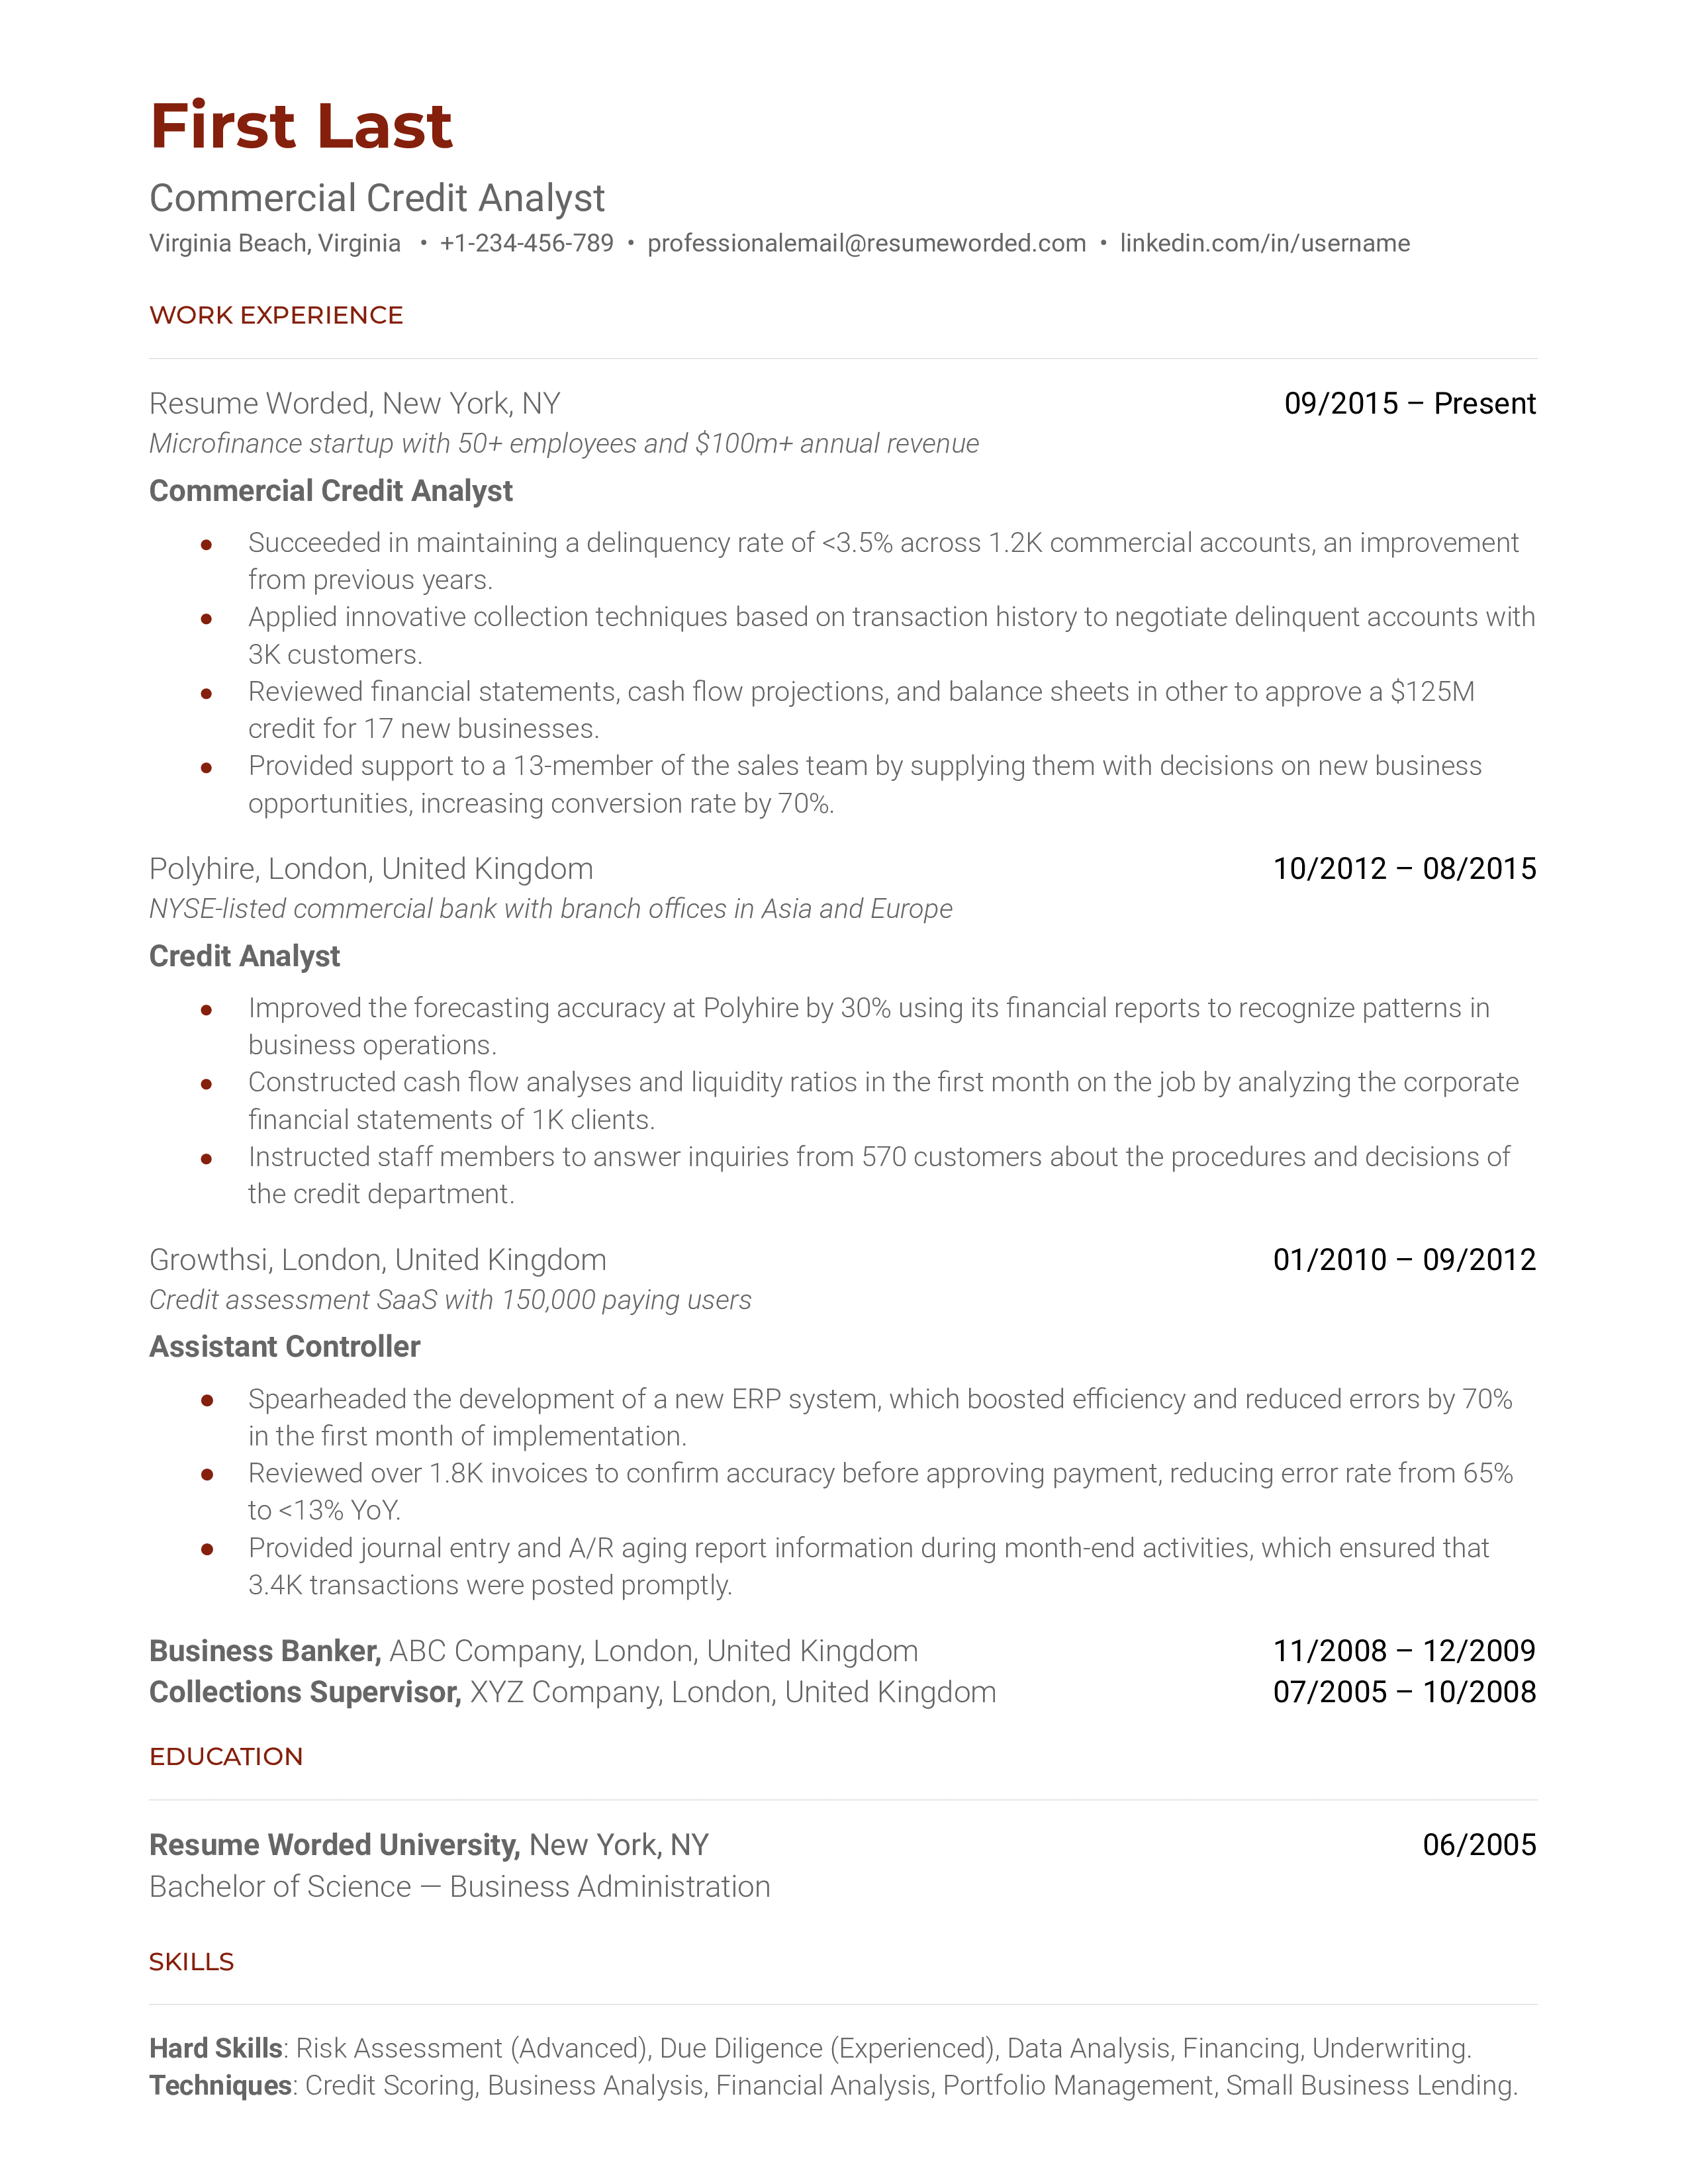 Commercial Credit Analyst Resume Sample